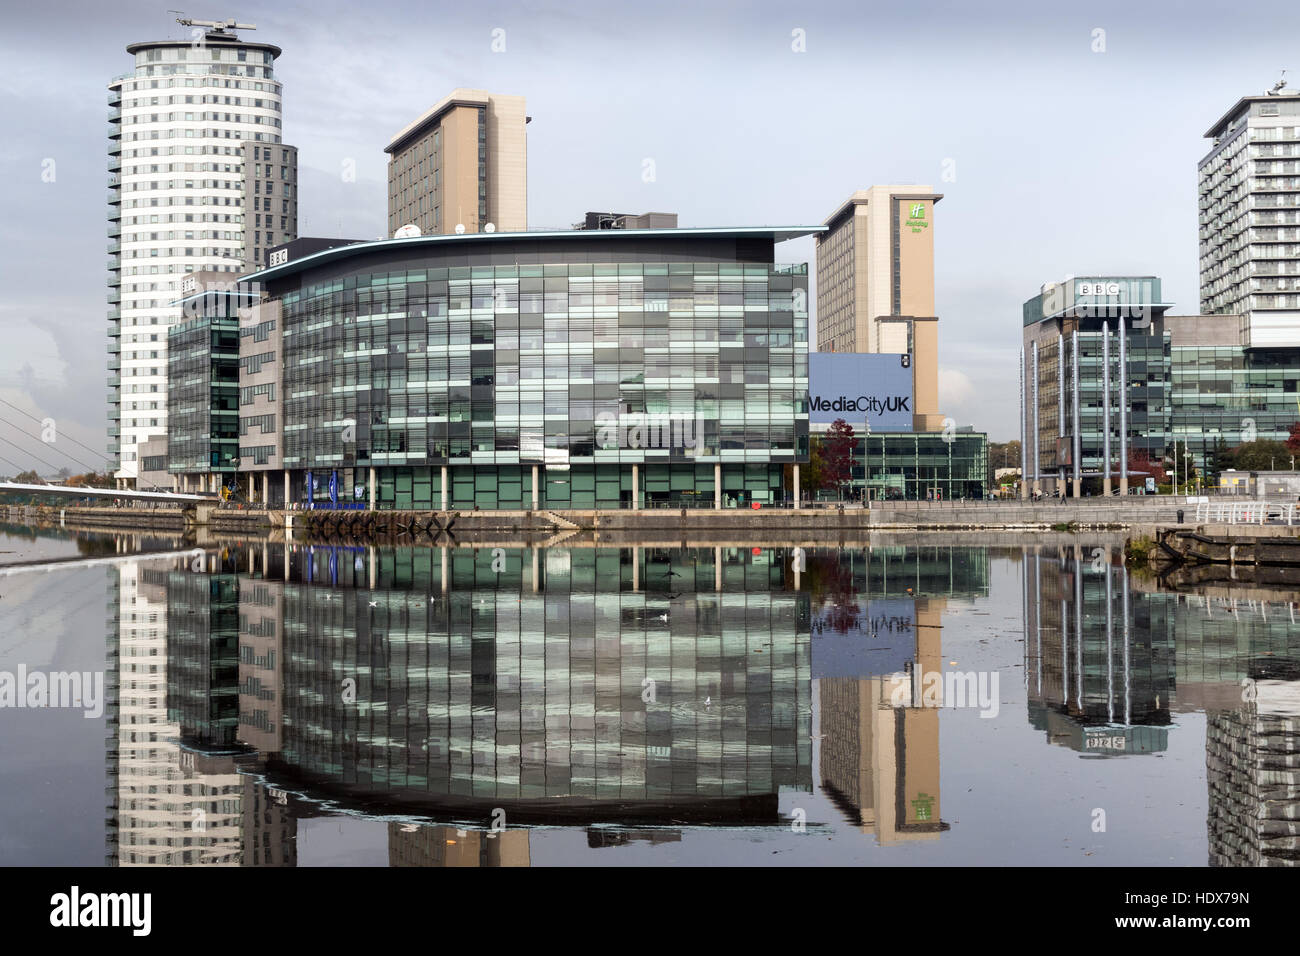 Media City, Salford Quays, Greater Manchester Foto Stock